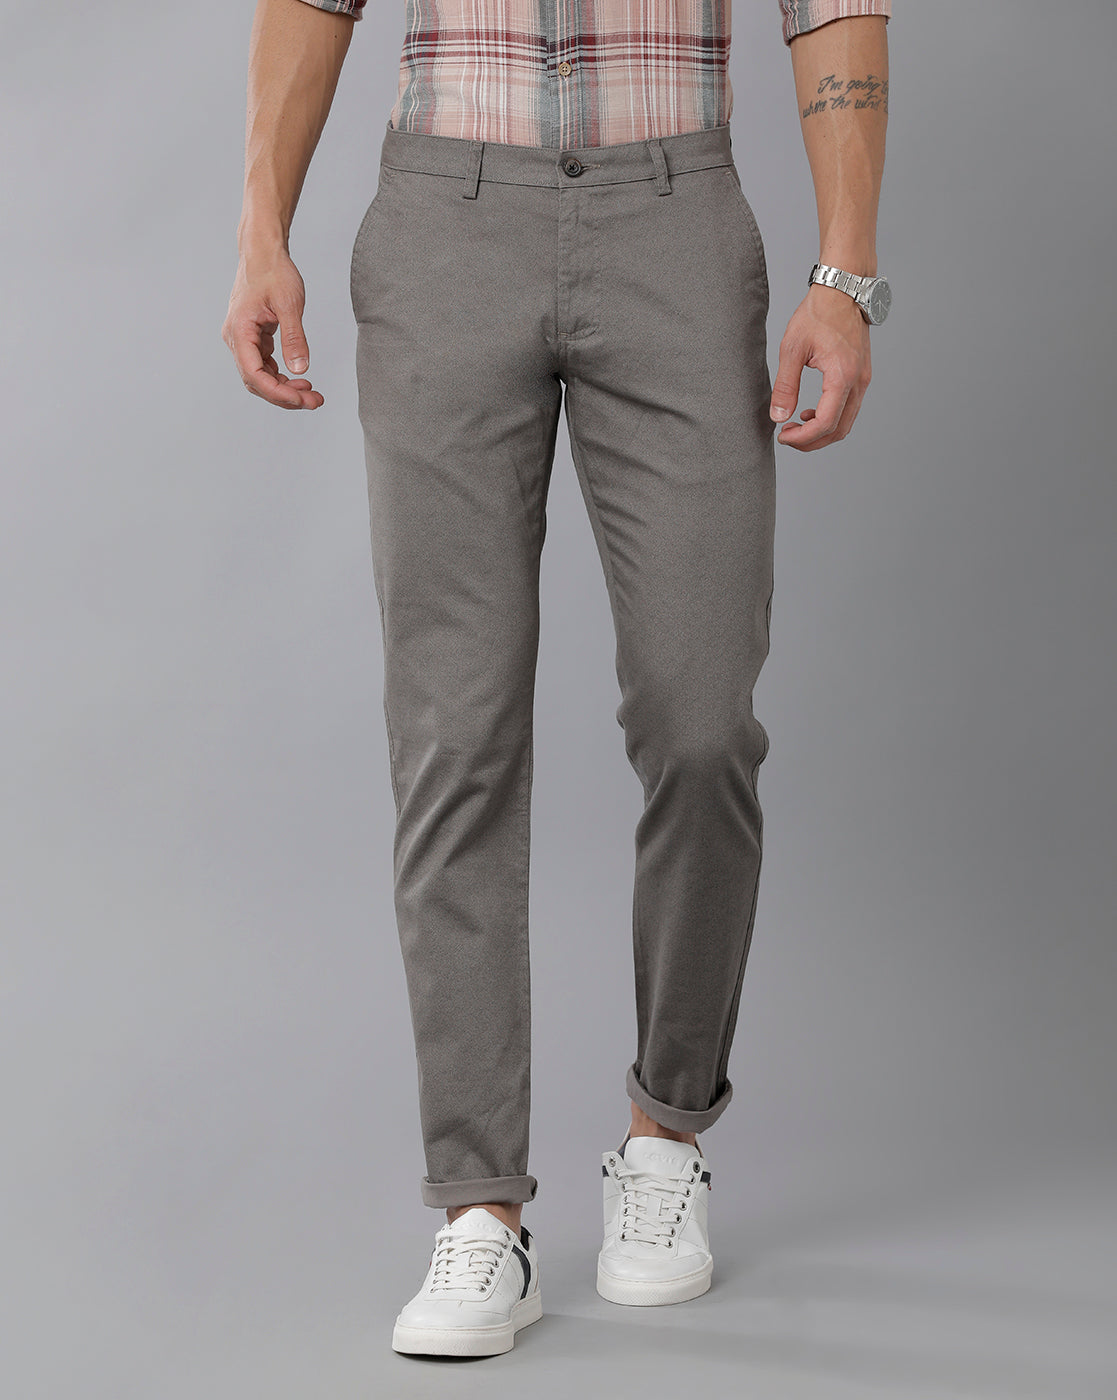 Casual Trousers in Light Khaki colour  urban clothing co